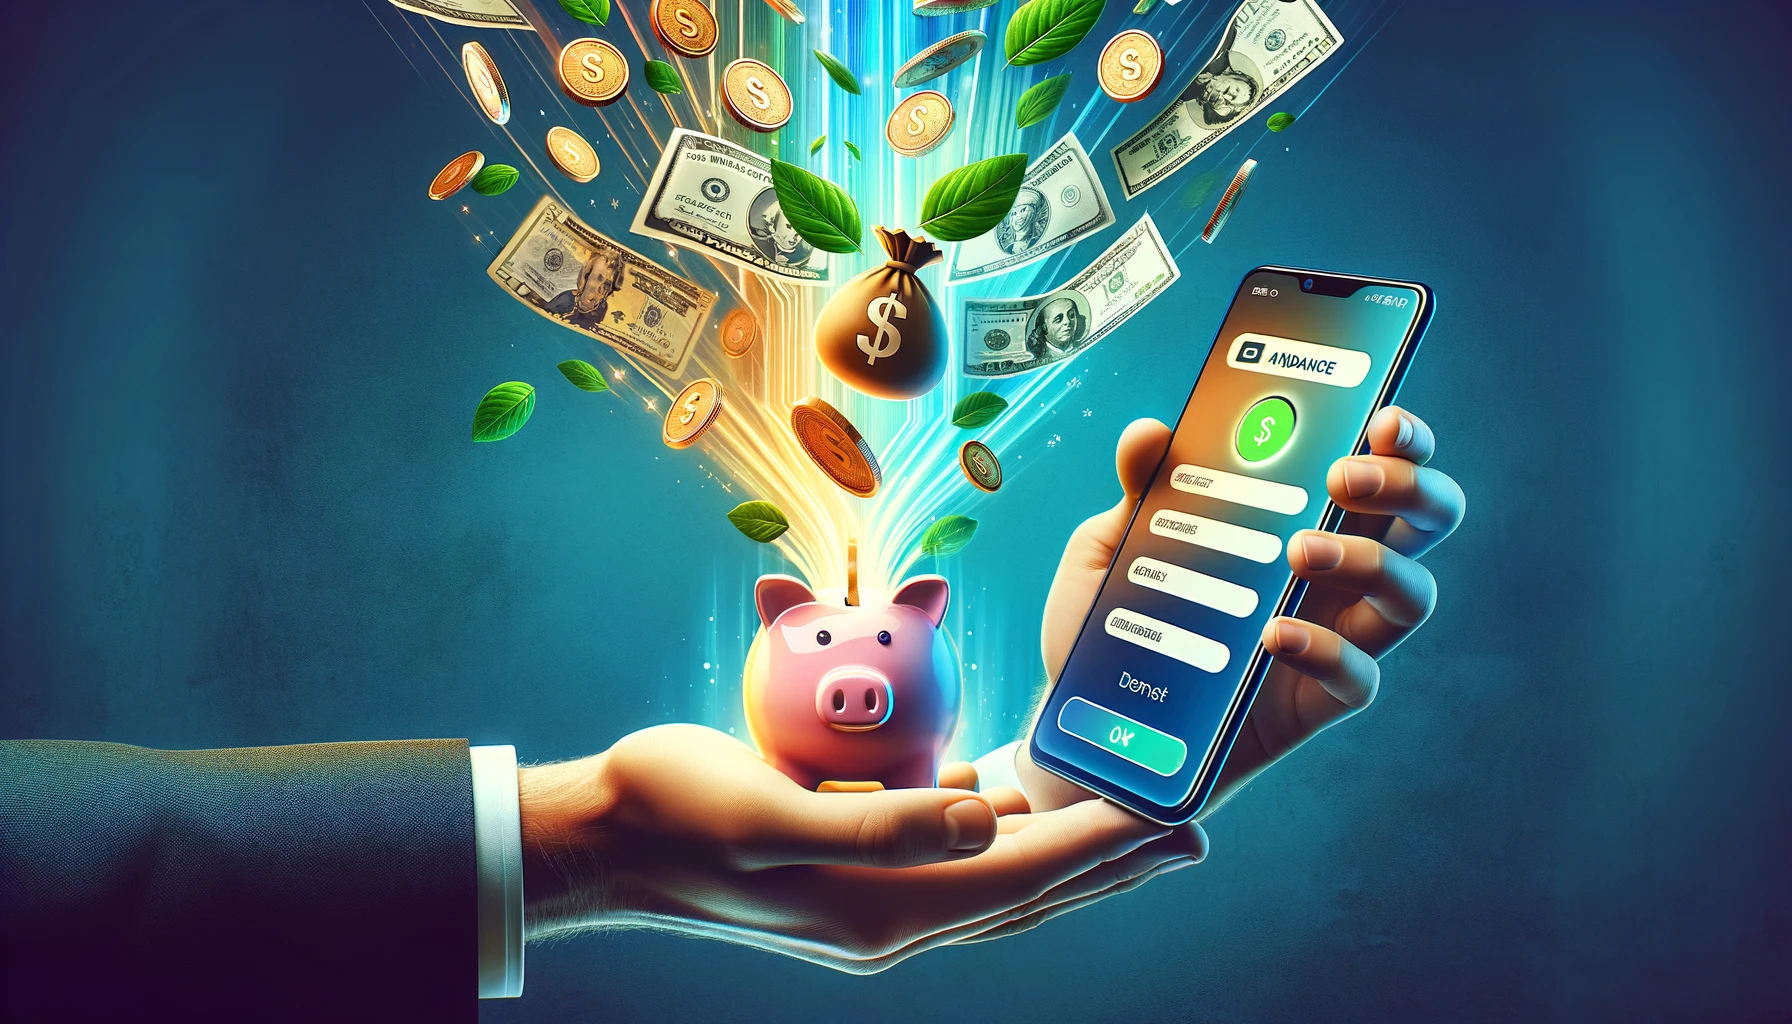 Highly colorful and frenetic illustration of a hand holding a piggy bank exploding with cash and a cash advance app on a phone screen